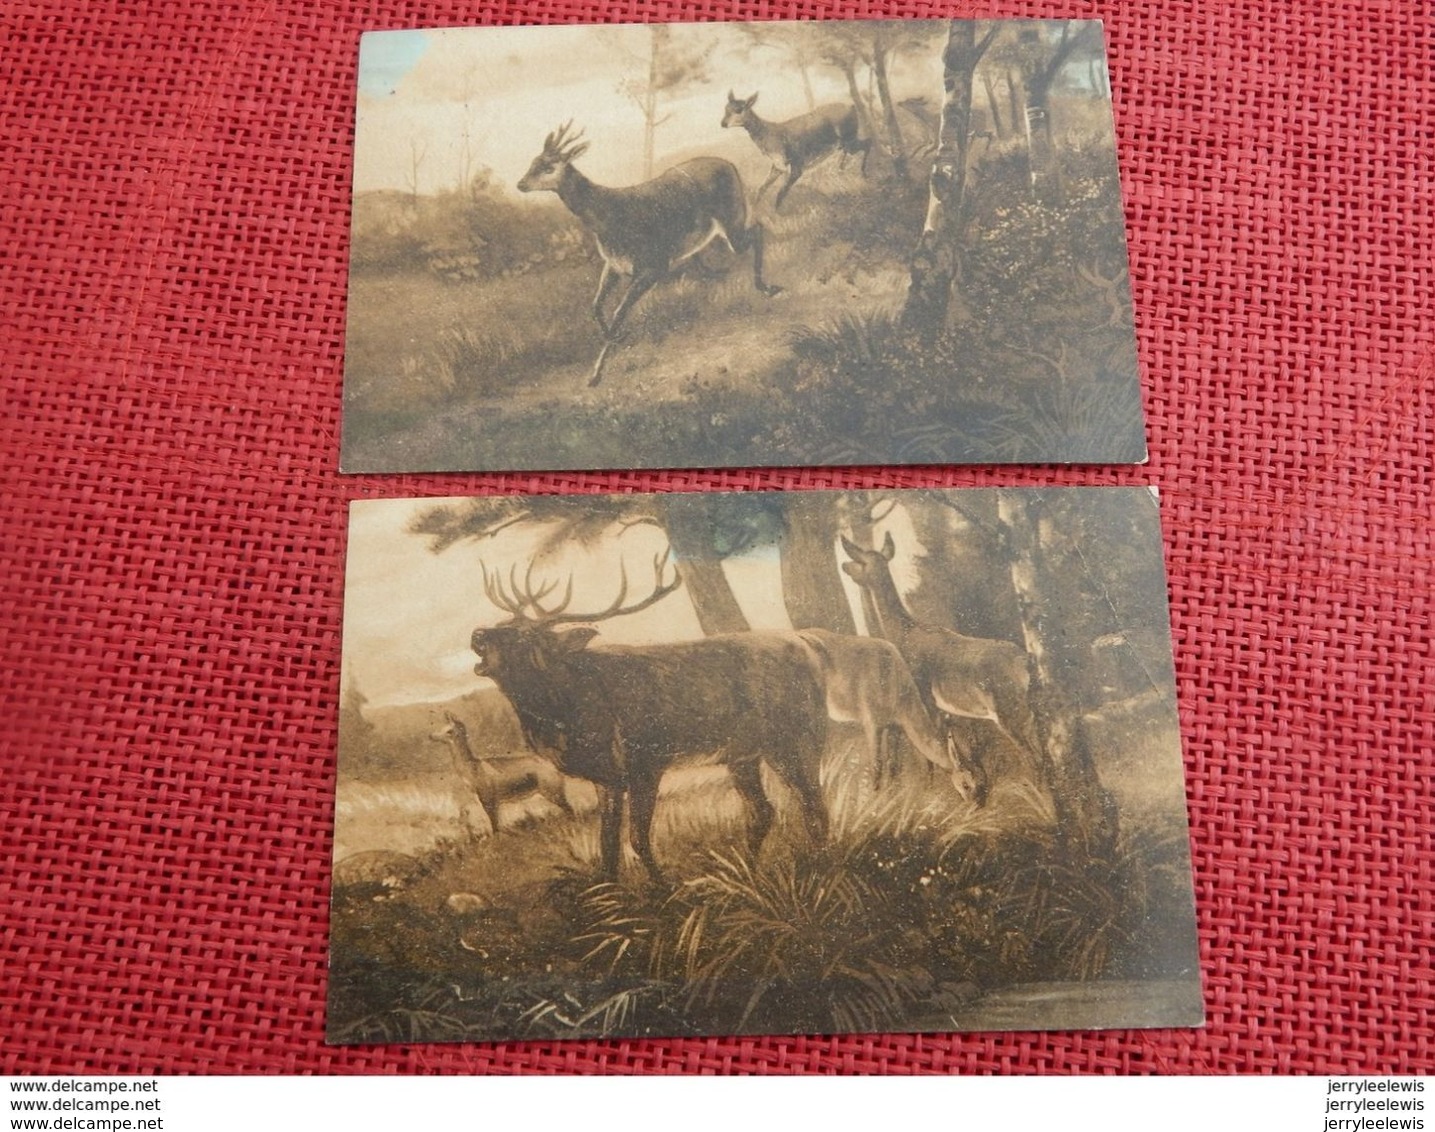 CHASSE  - SANGLIER , CERF Ert BICHES  -  Lot De 3 Cartes - Chasse